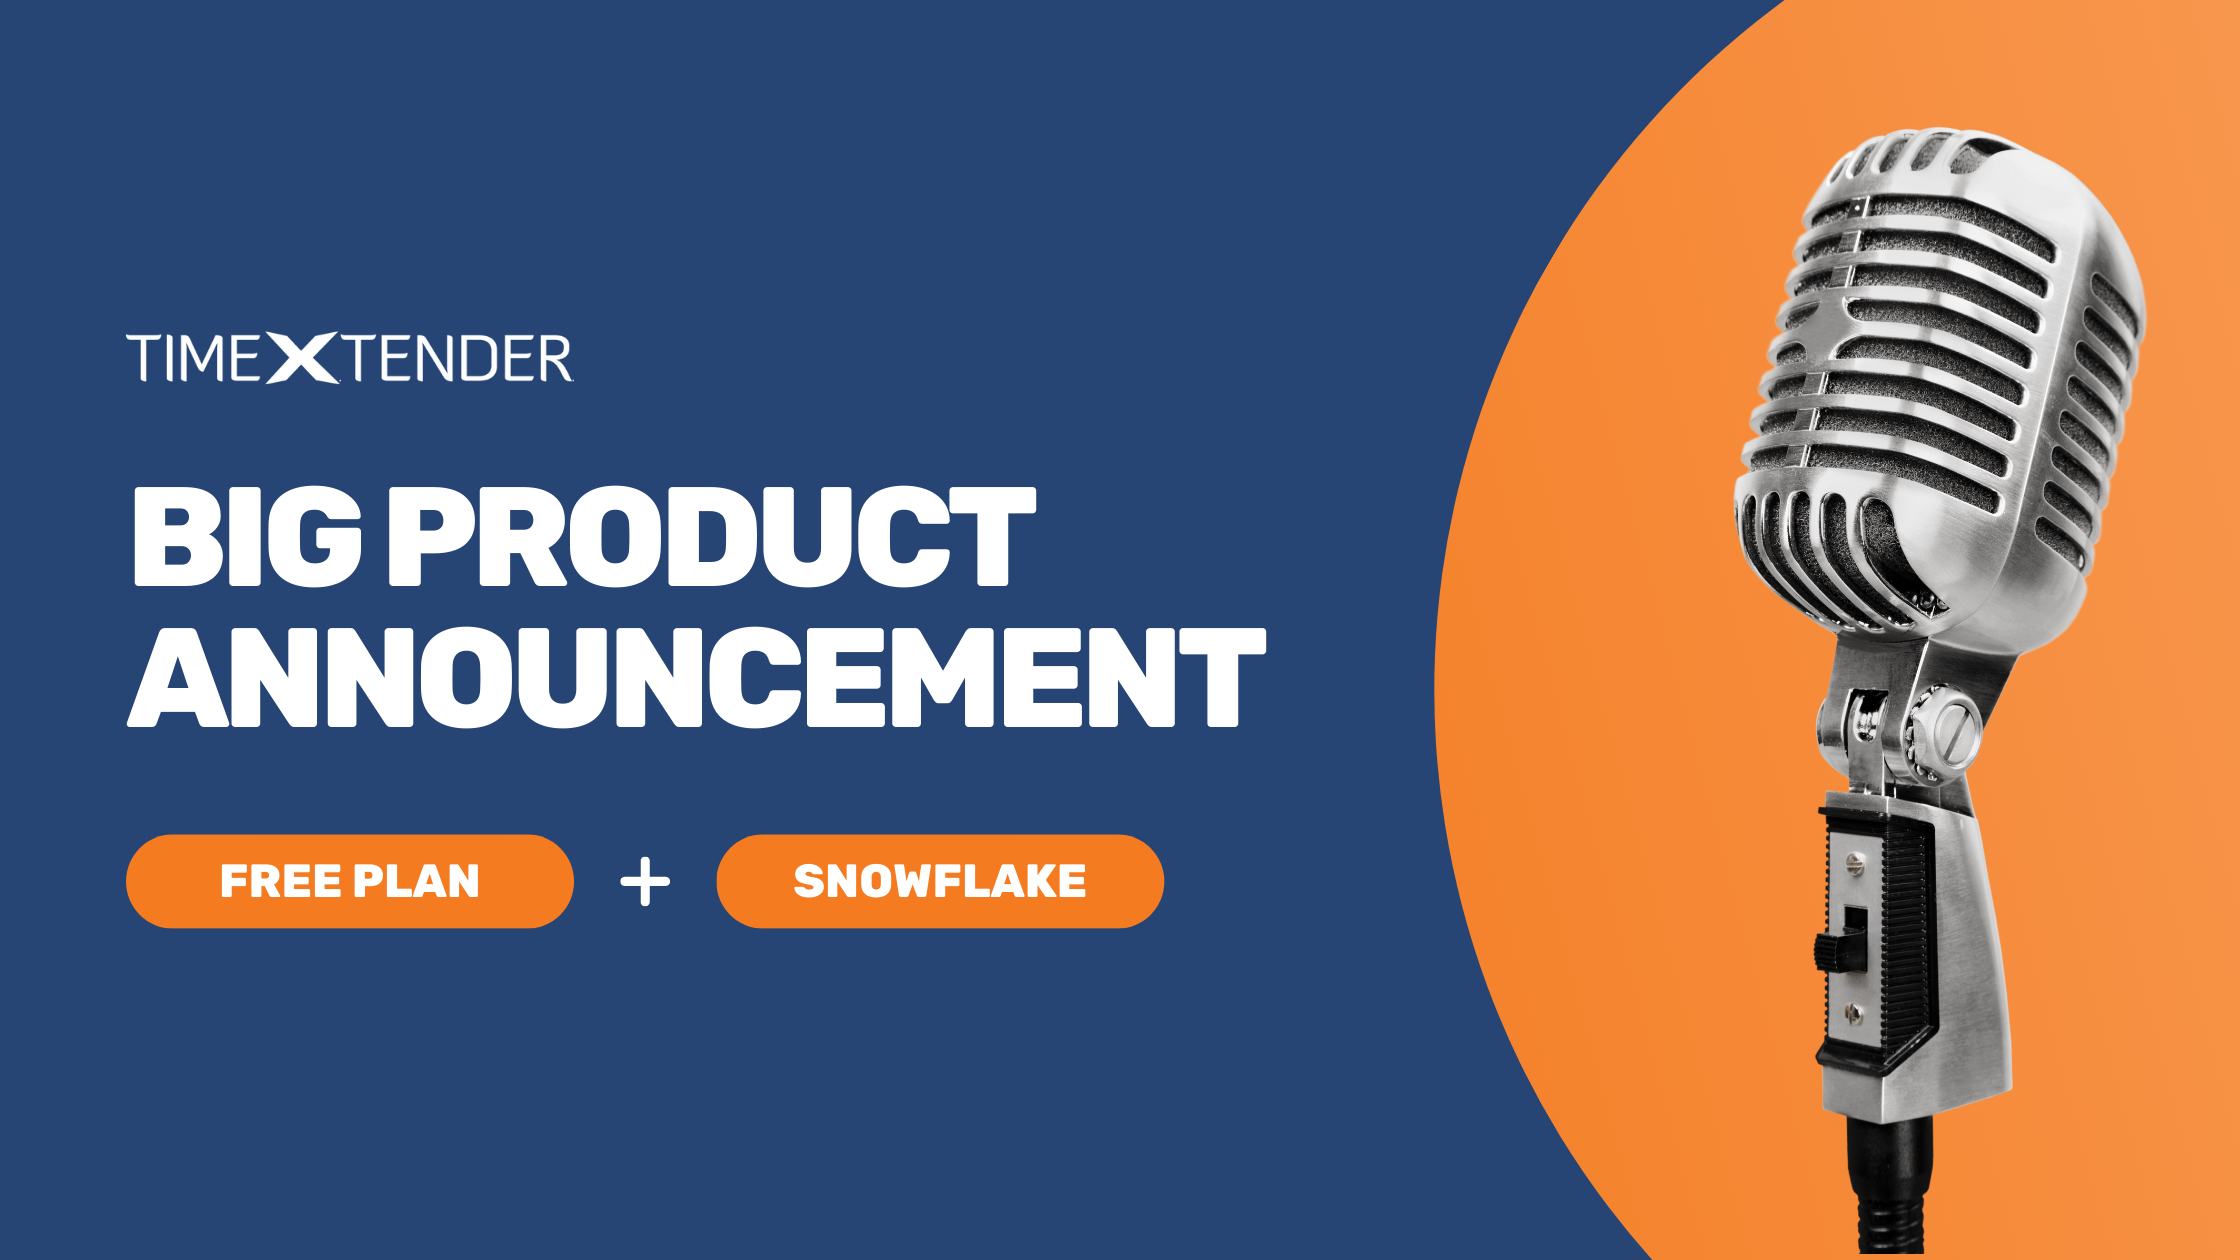 Big Product Announcement: NEW Free Plan + Snowflake Integration!